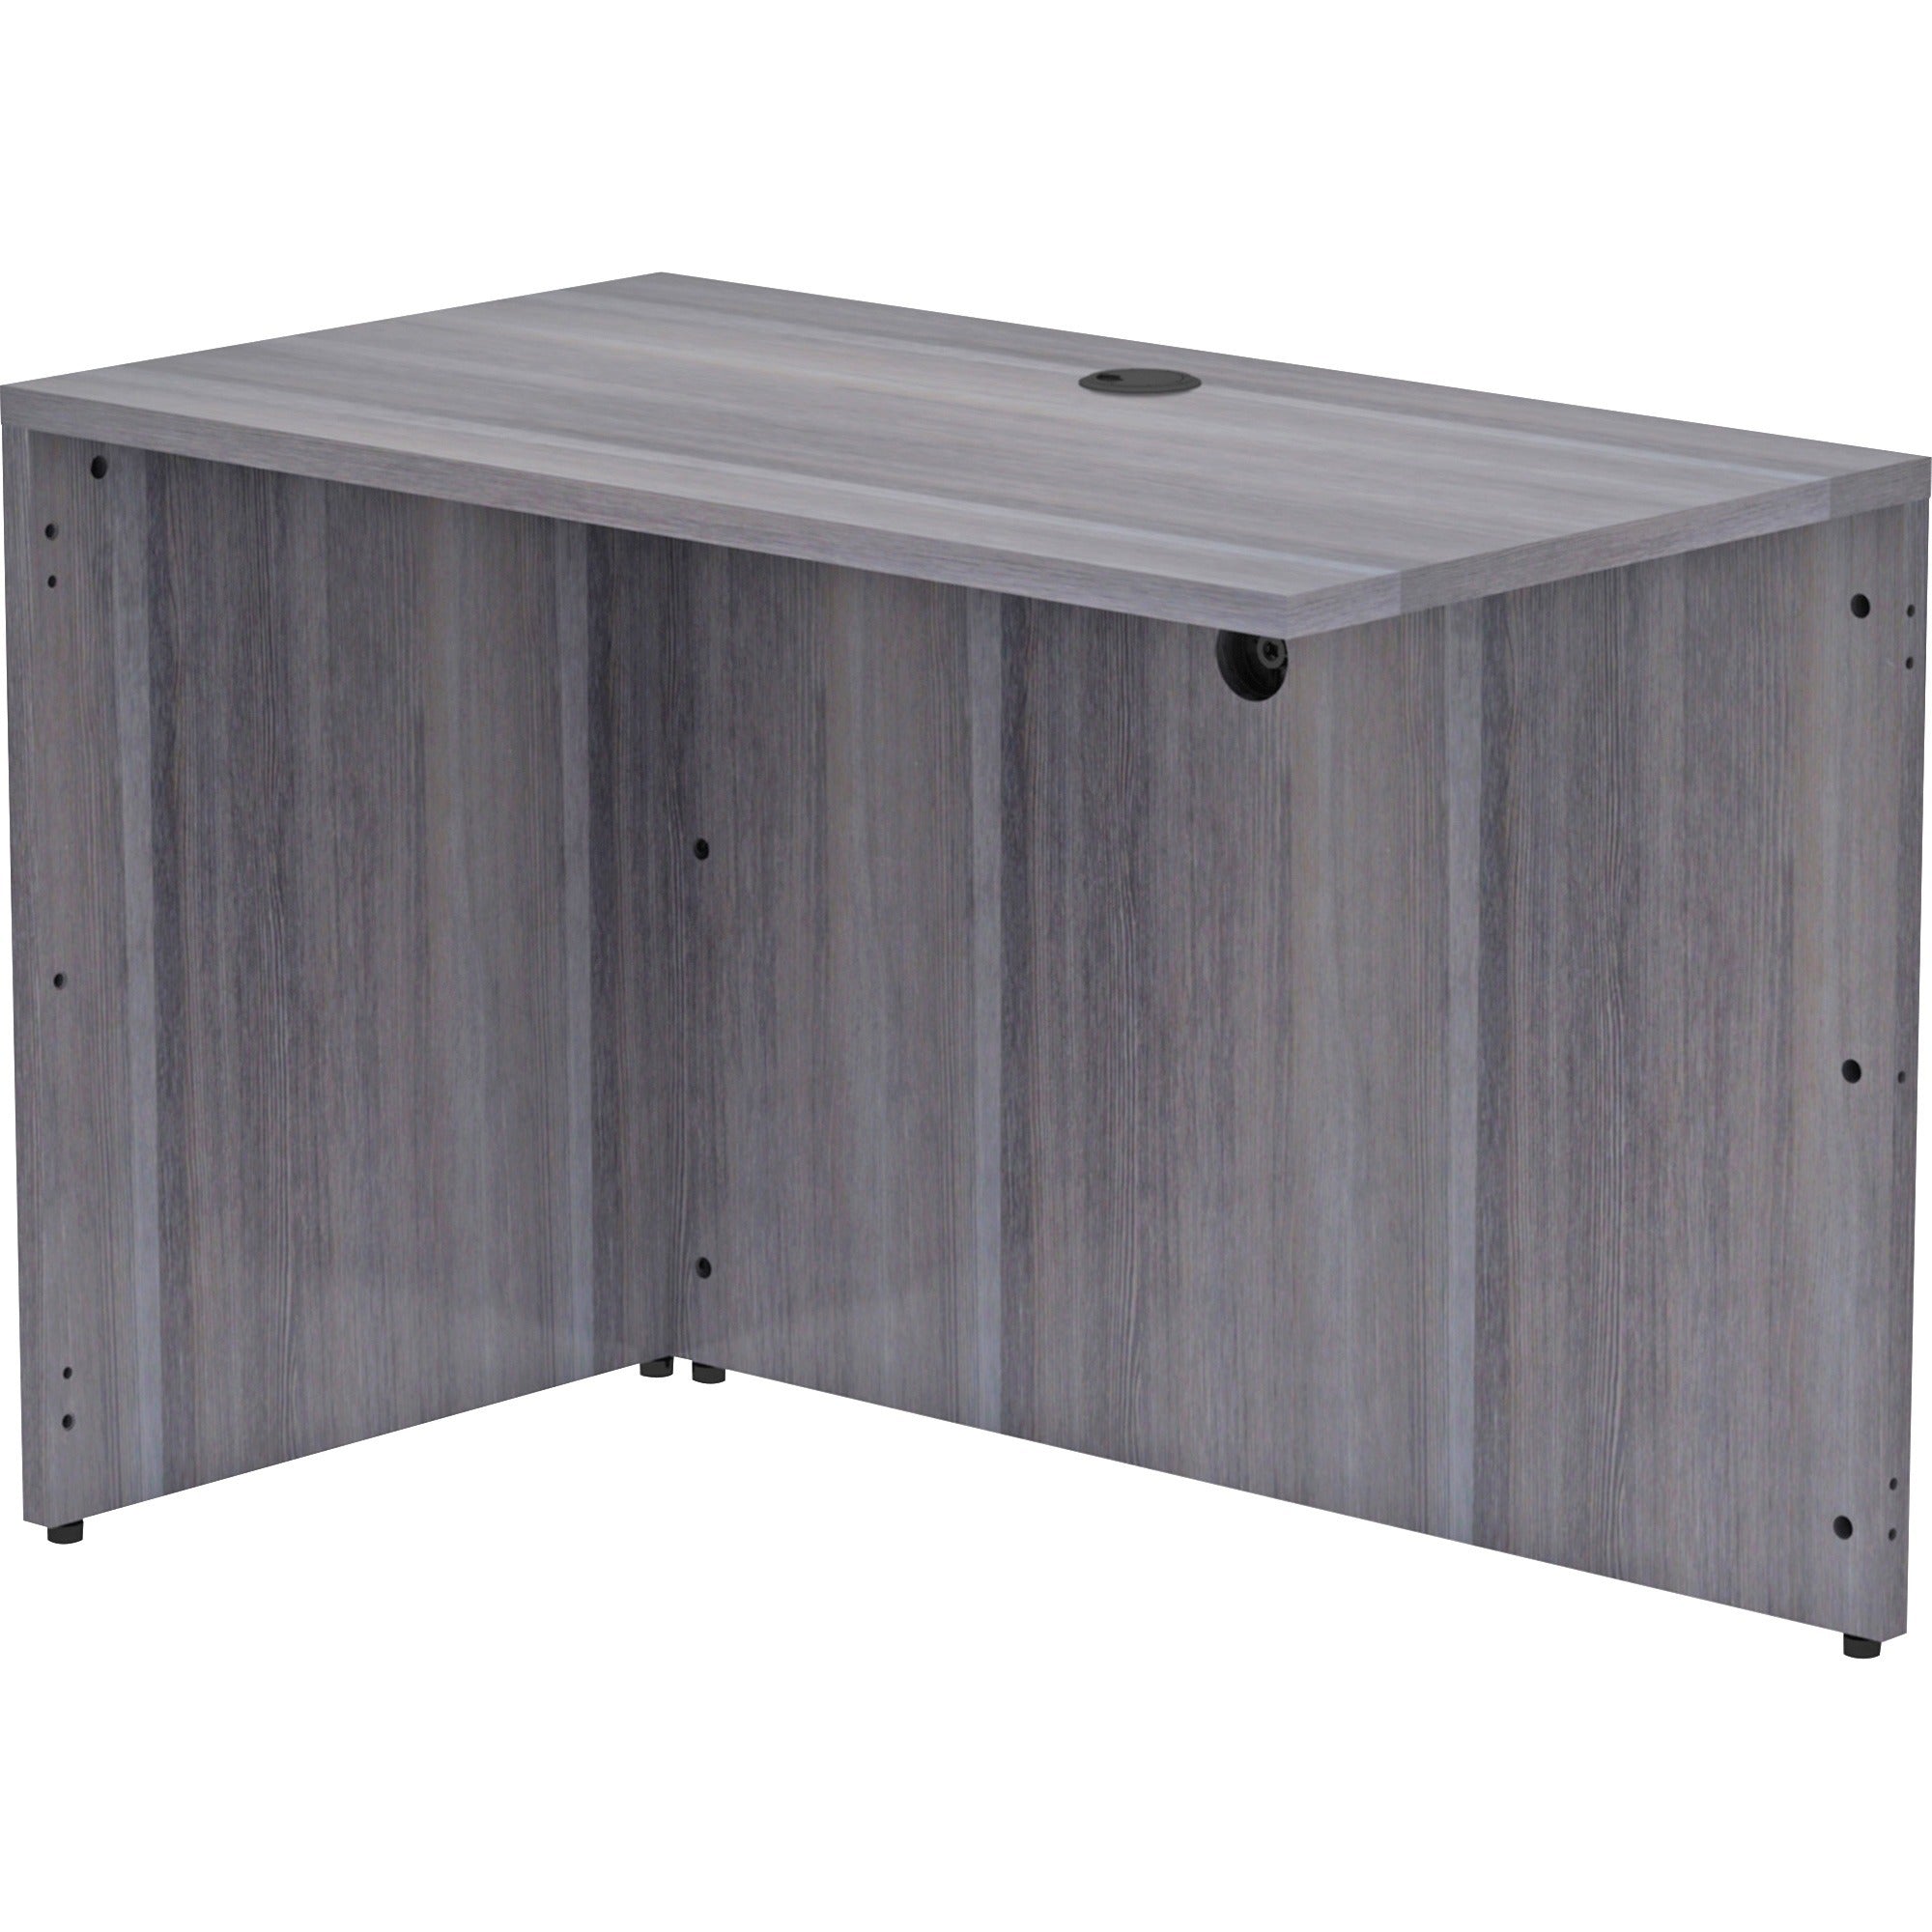 lorell-essentials-series-return-shell-42-x-24295--1-top-laminate-weathered-charcoal-table-top-modesty-panel_llr69555 - 6